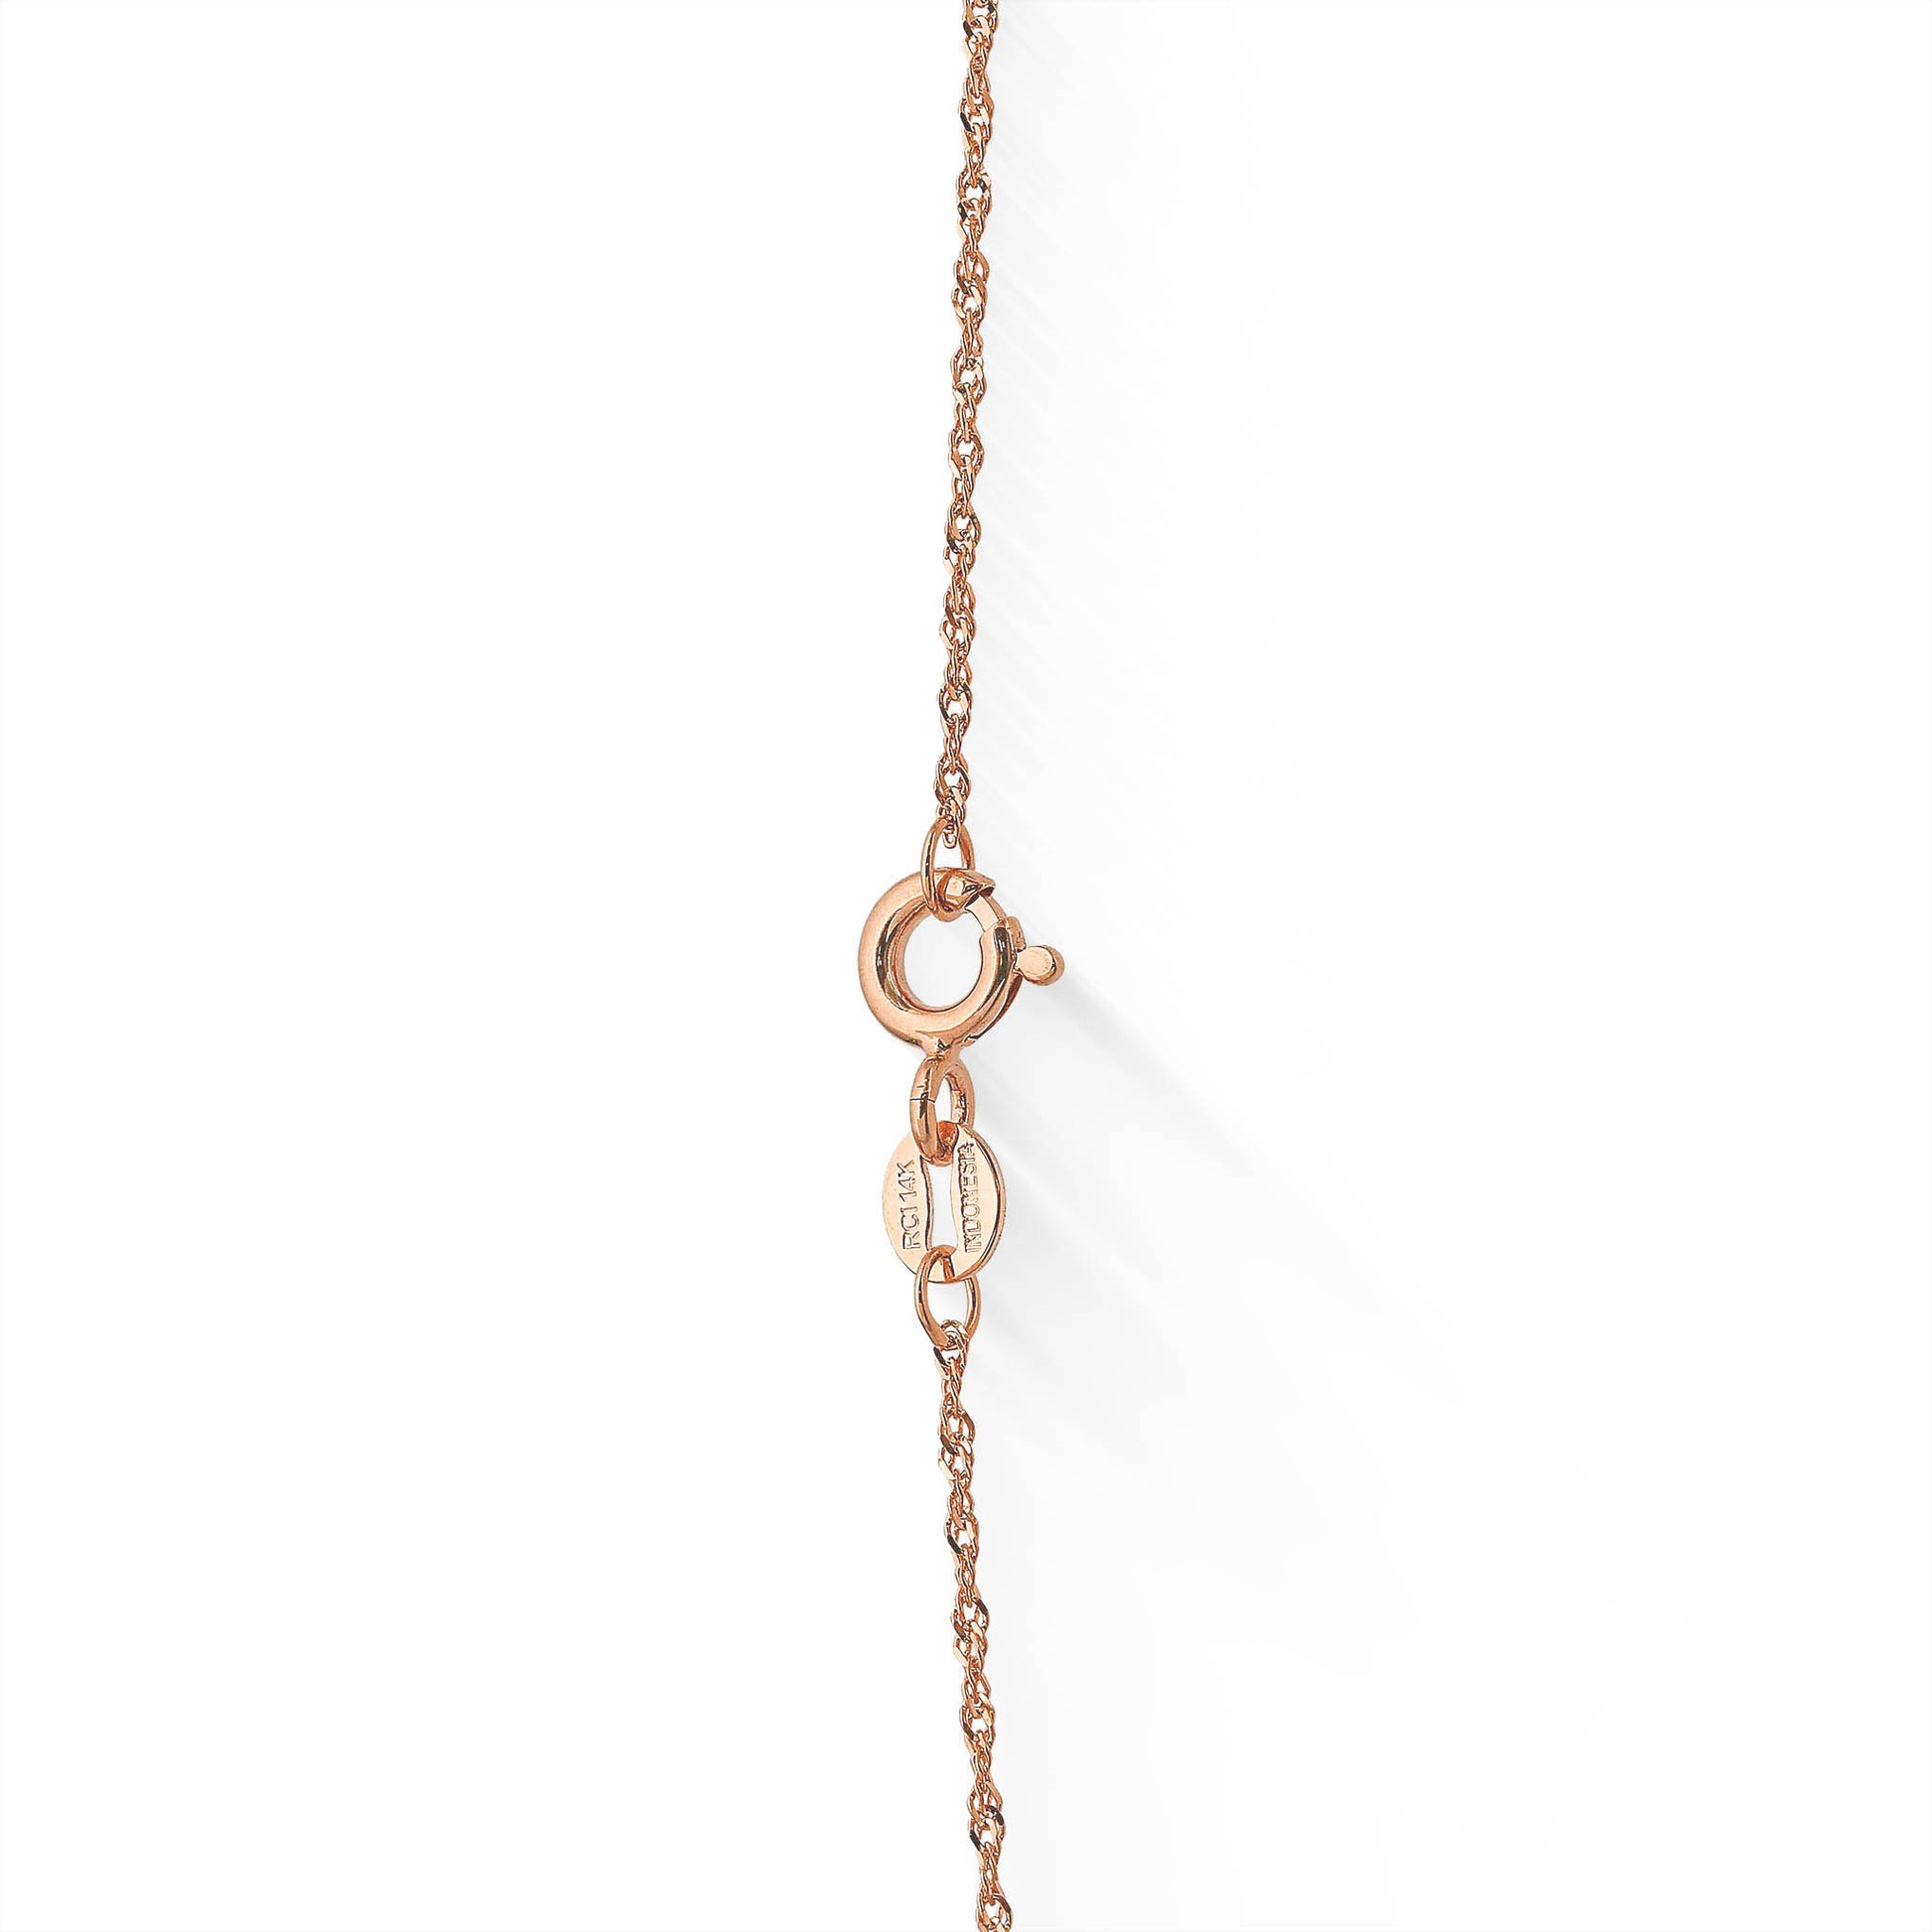 700158 - 14K Rose Gold - 20" Singapore Chain, 1.1mm